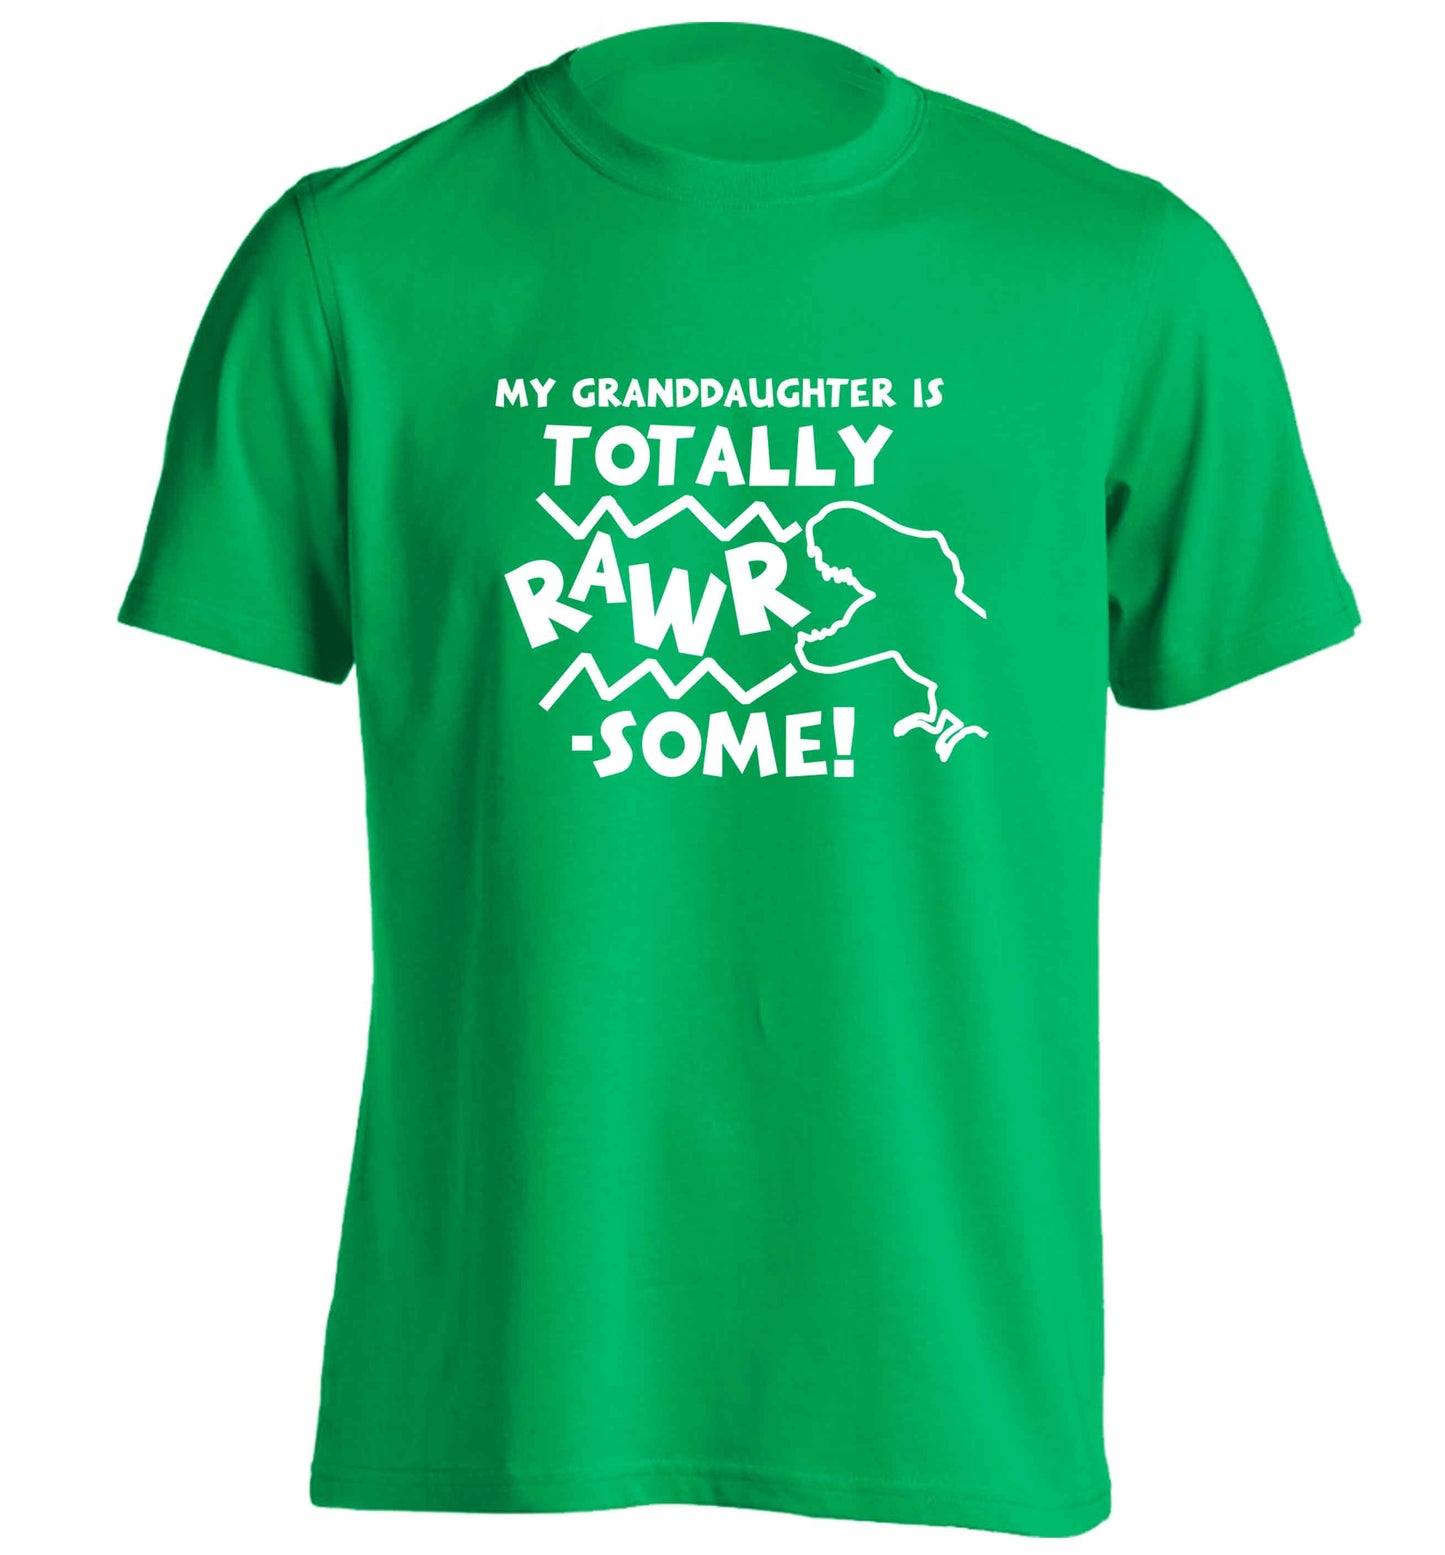 My granddaughter is totally rawrsome adults unisex green Tshirt small